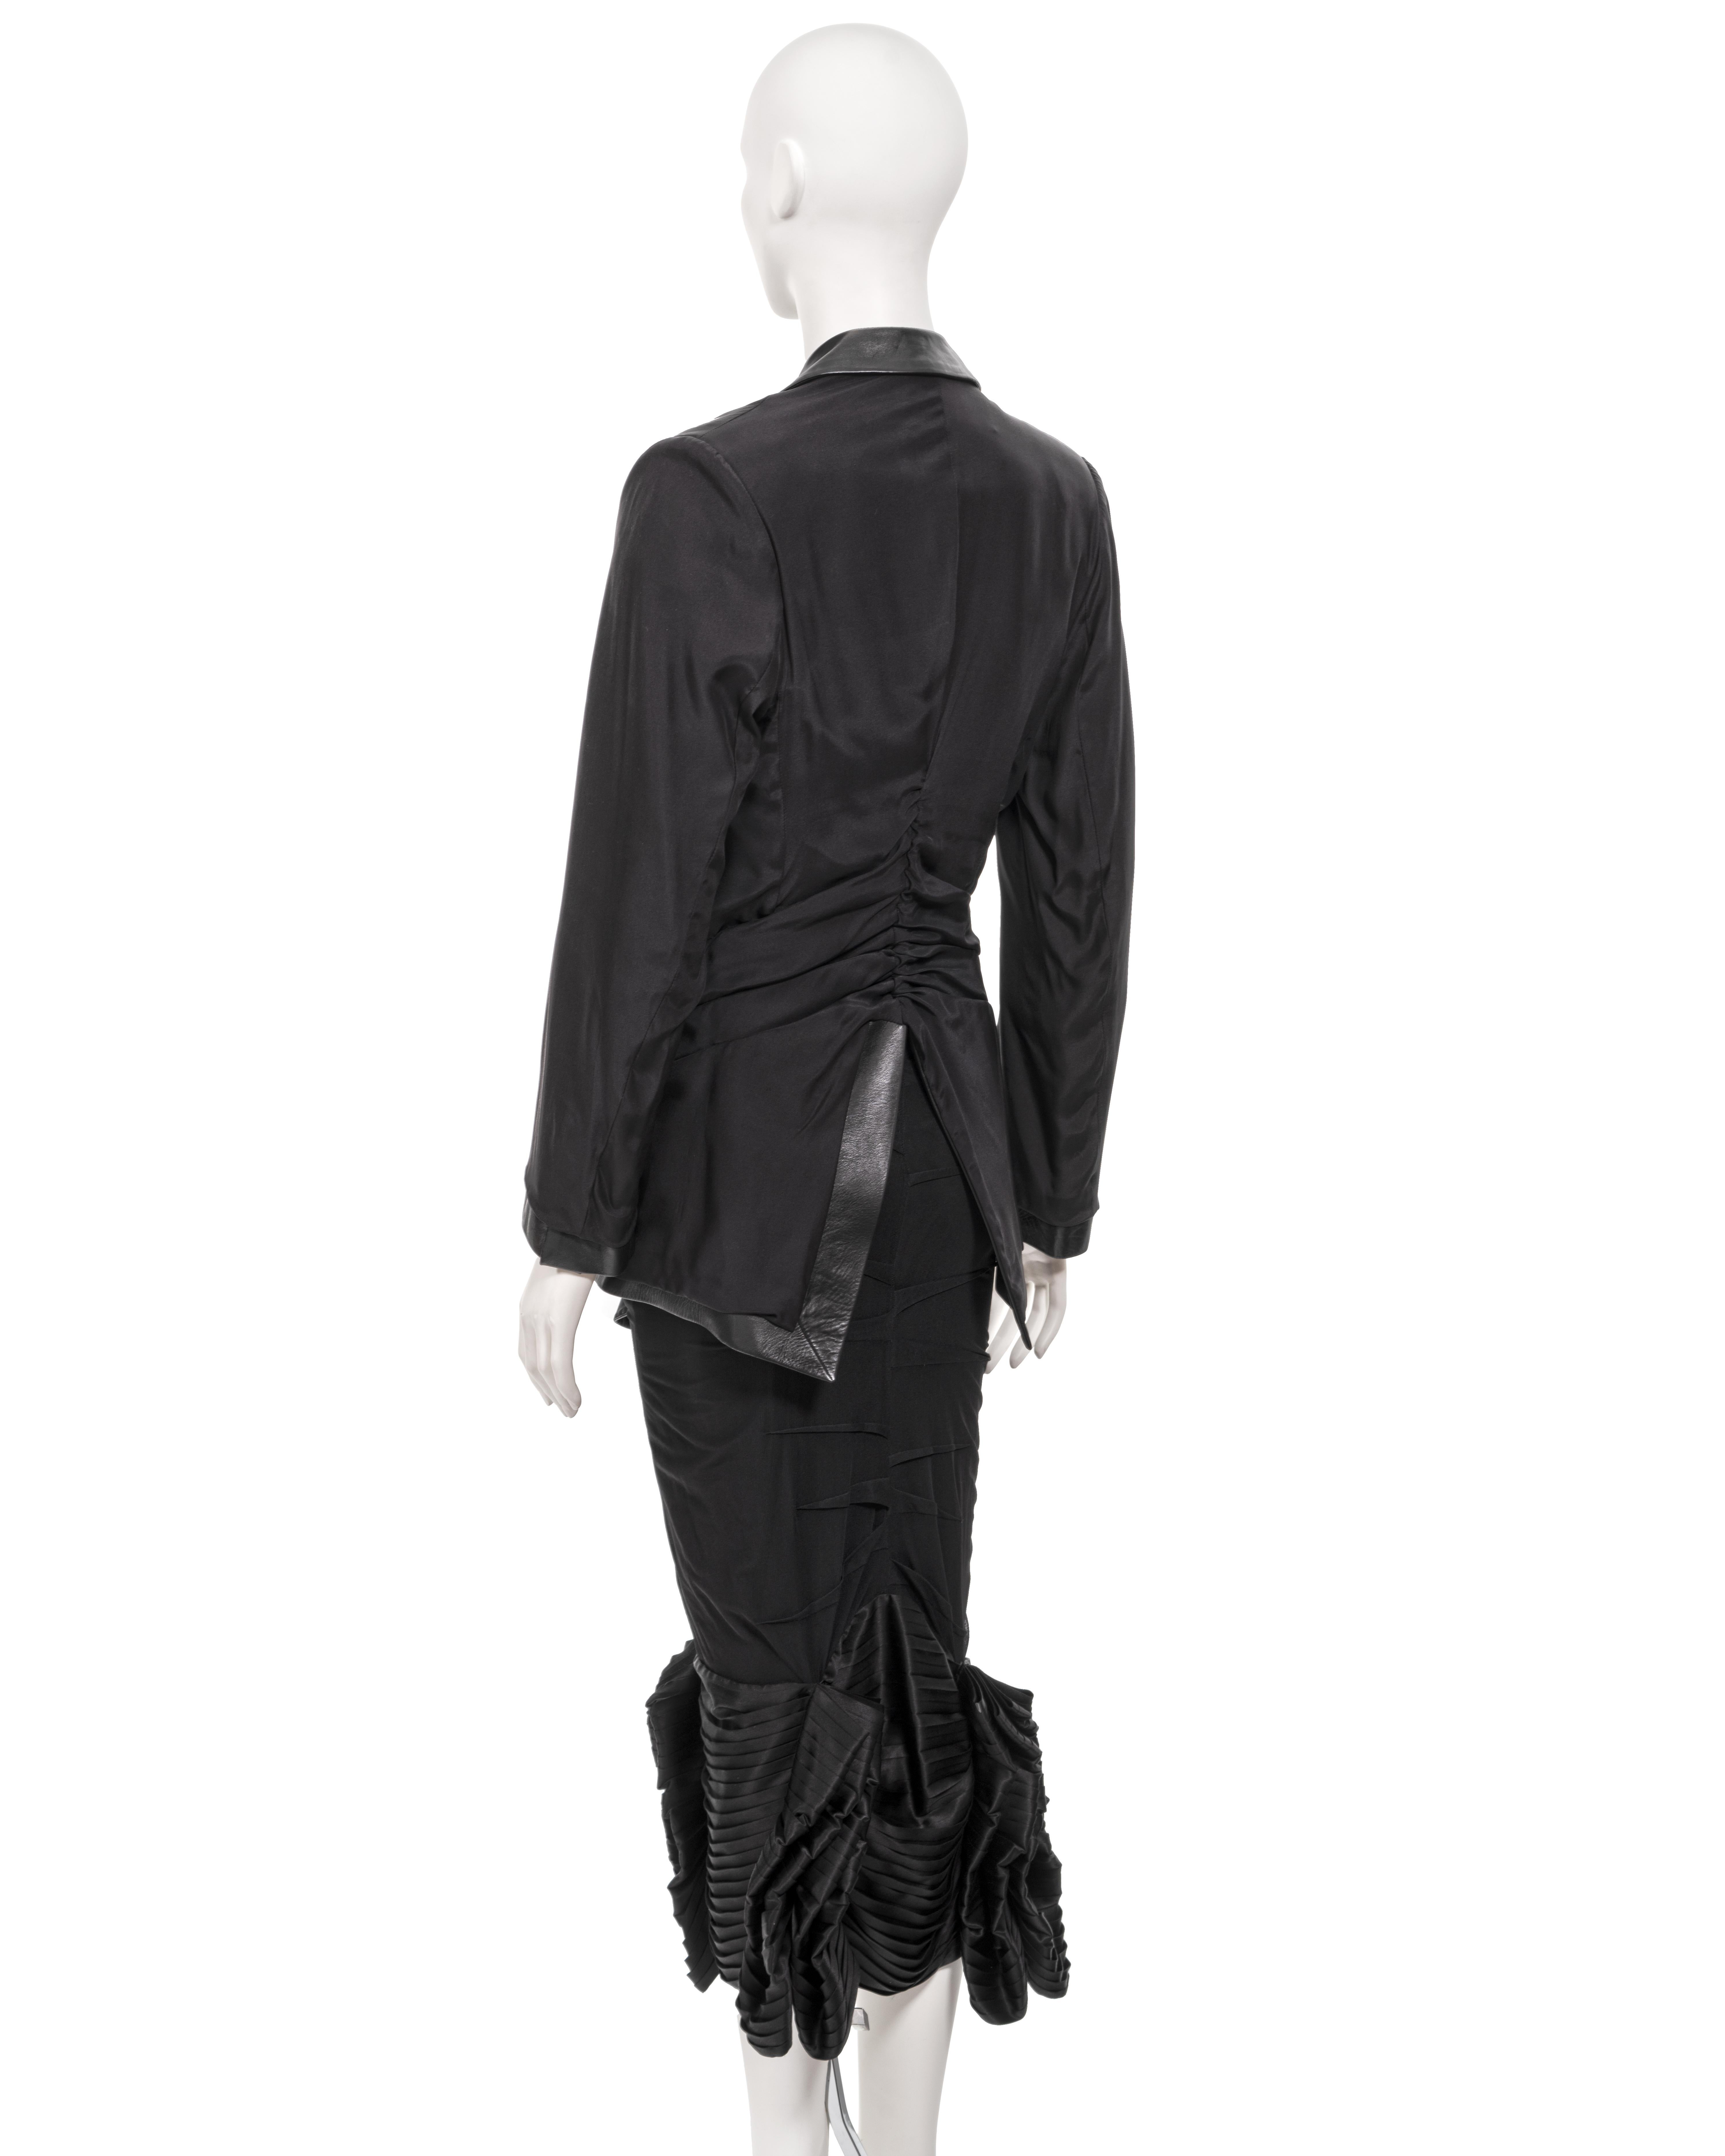 Christian Dior by John Galliano inside-out leather jacket and skirt set, ss 2003 For Sale 8